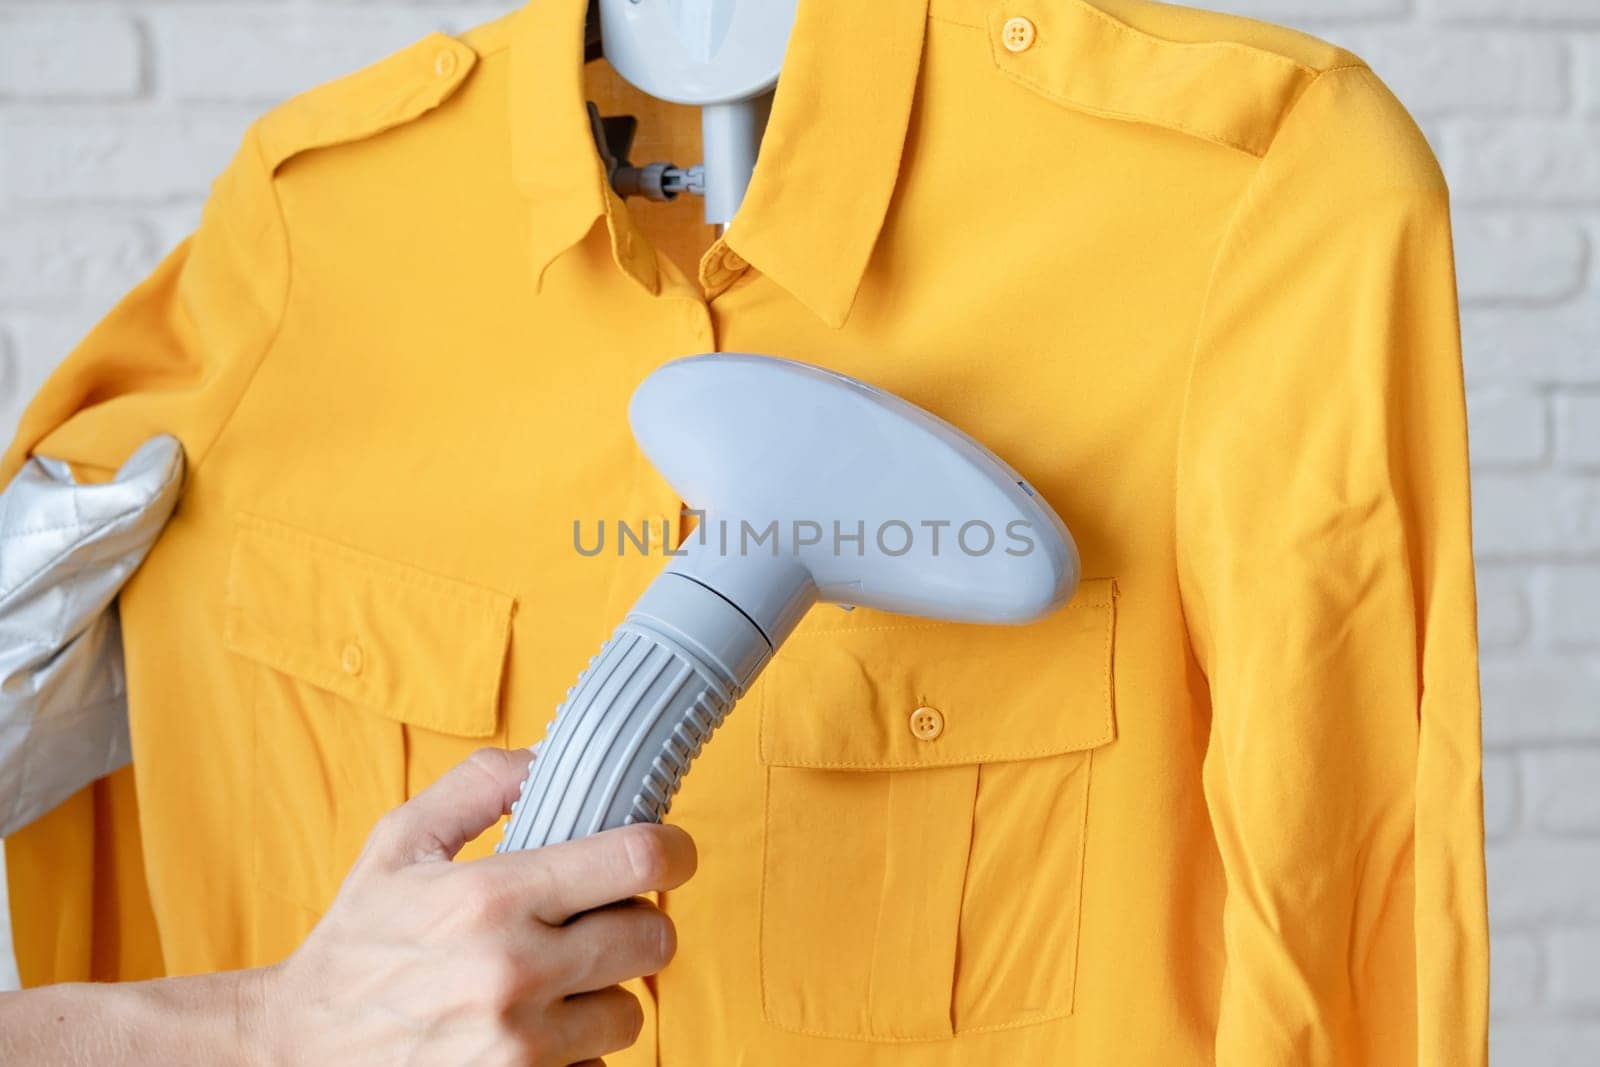 female hand using vertical steamer steaming yellow shirt. steam for ironing clothes. household appliances for the home.